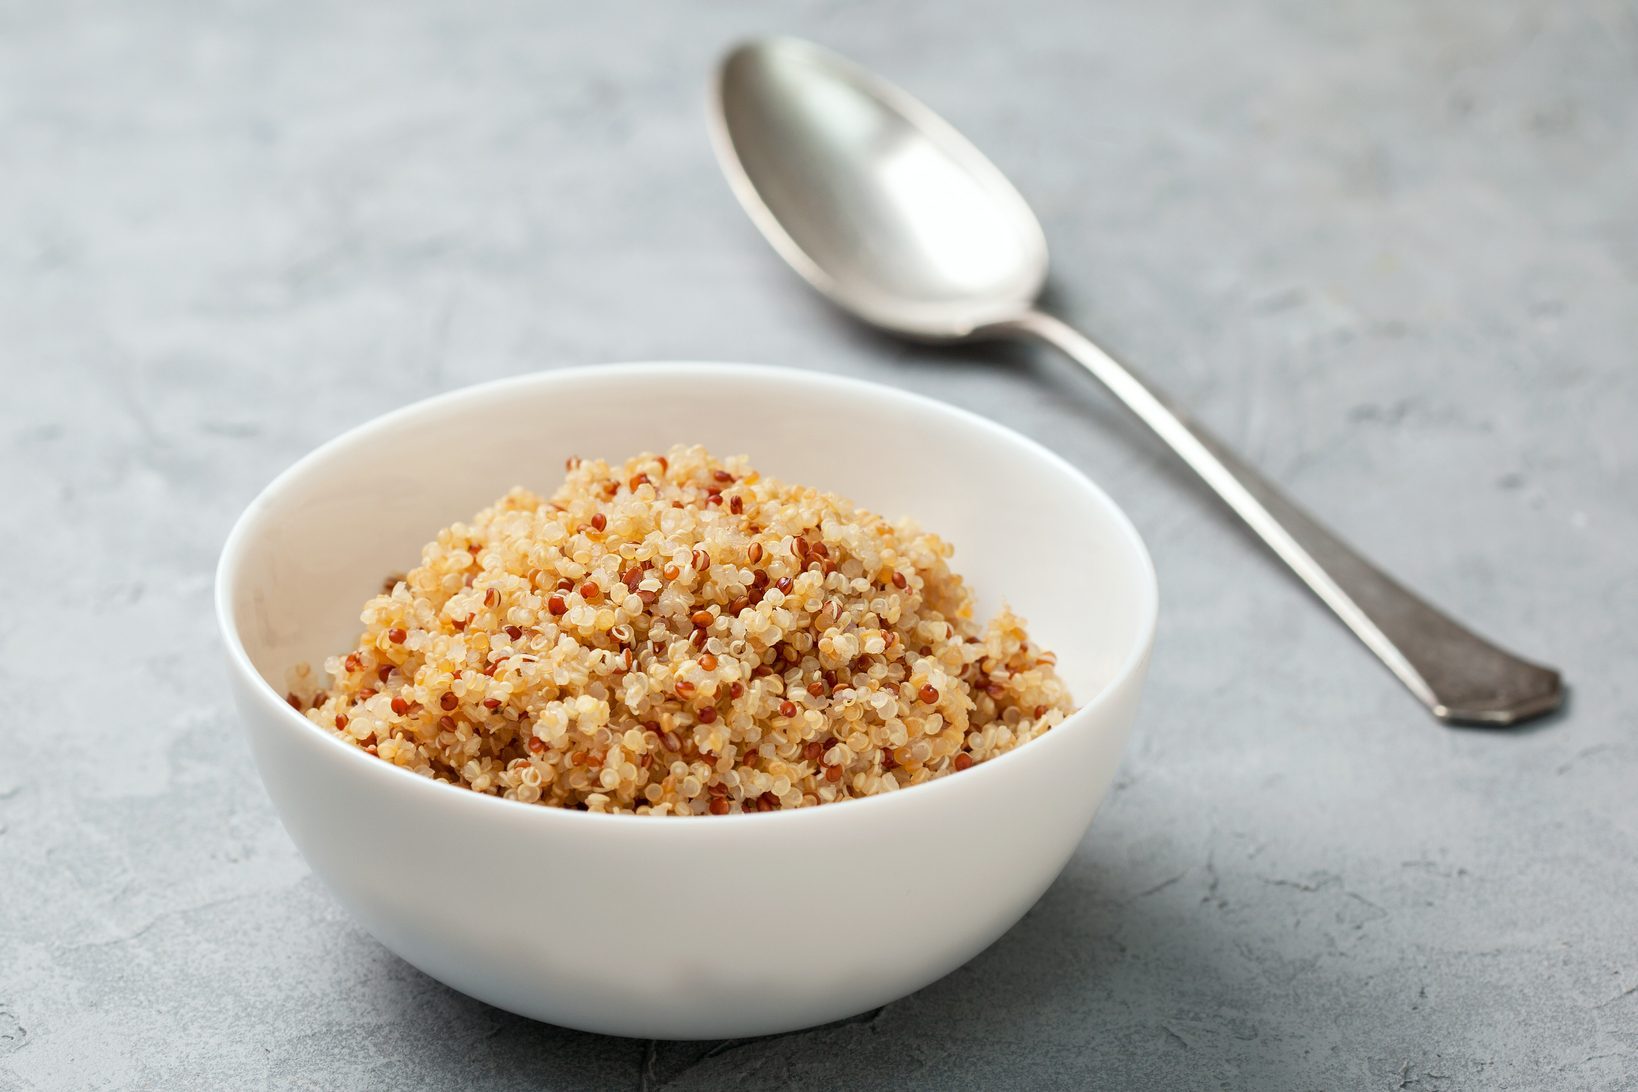 What Is Quinoa? Quinoa Nutrition, Cooking, And More!